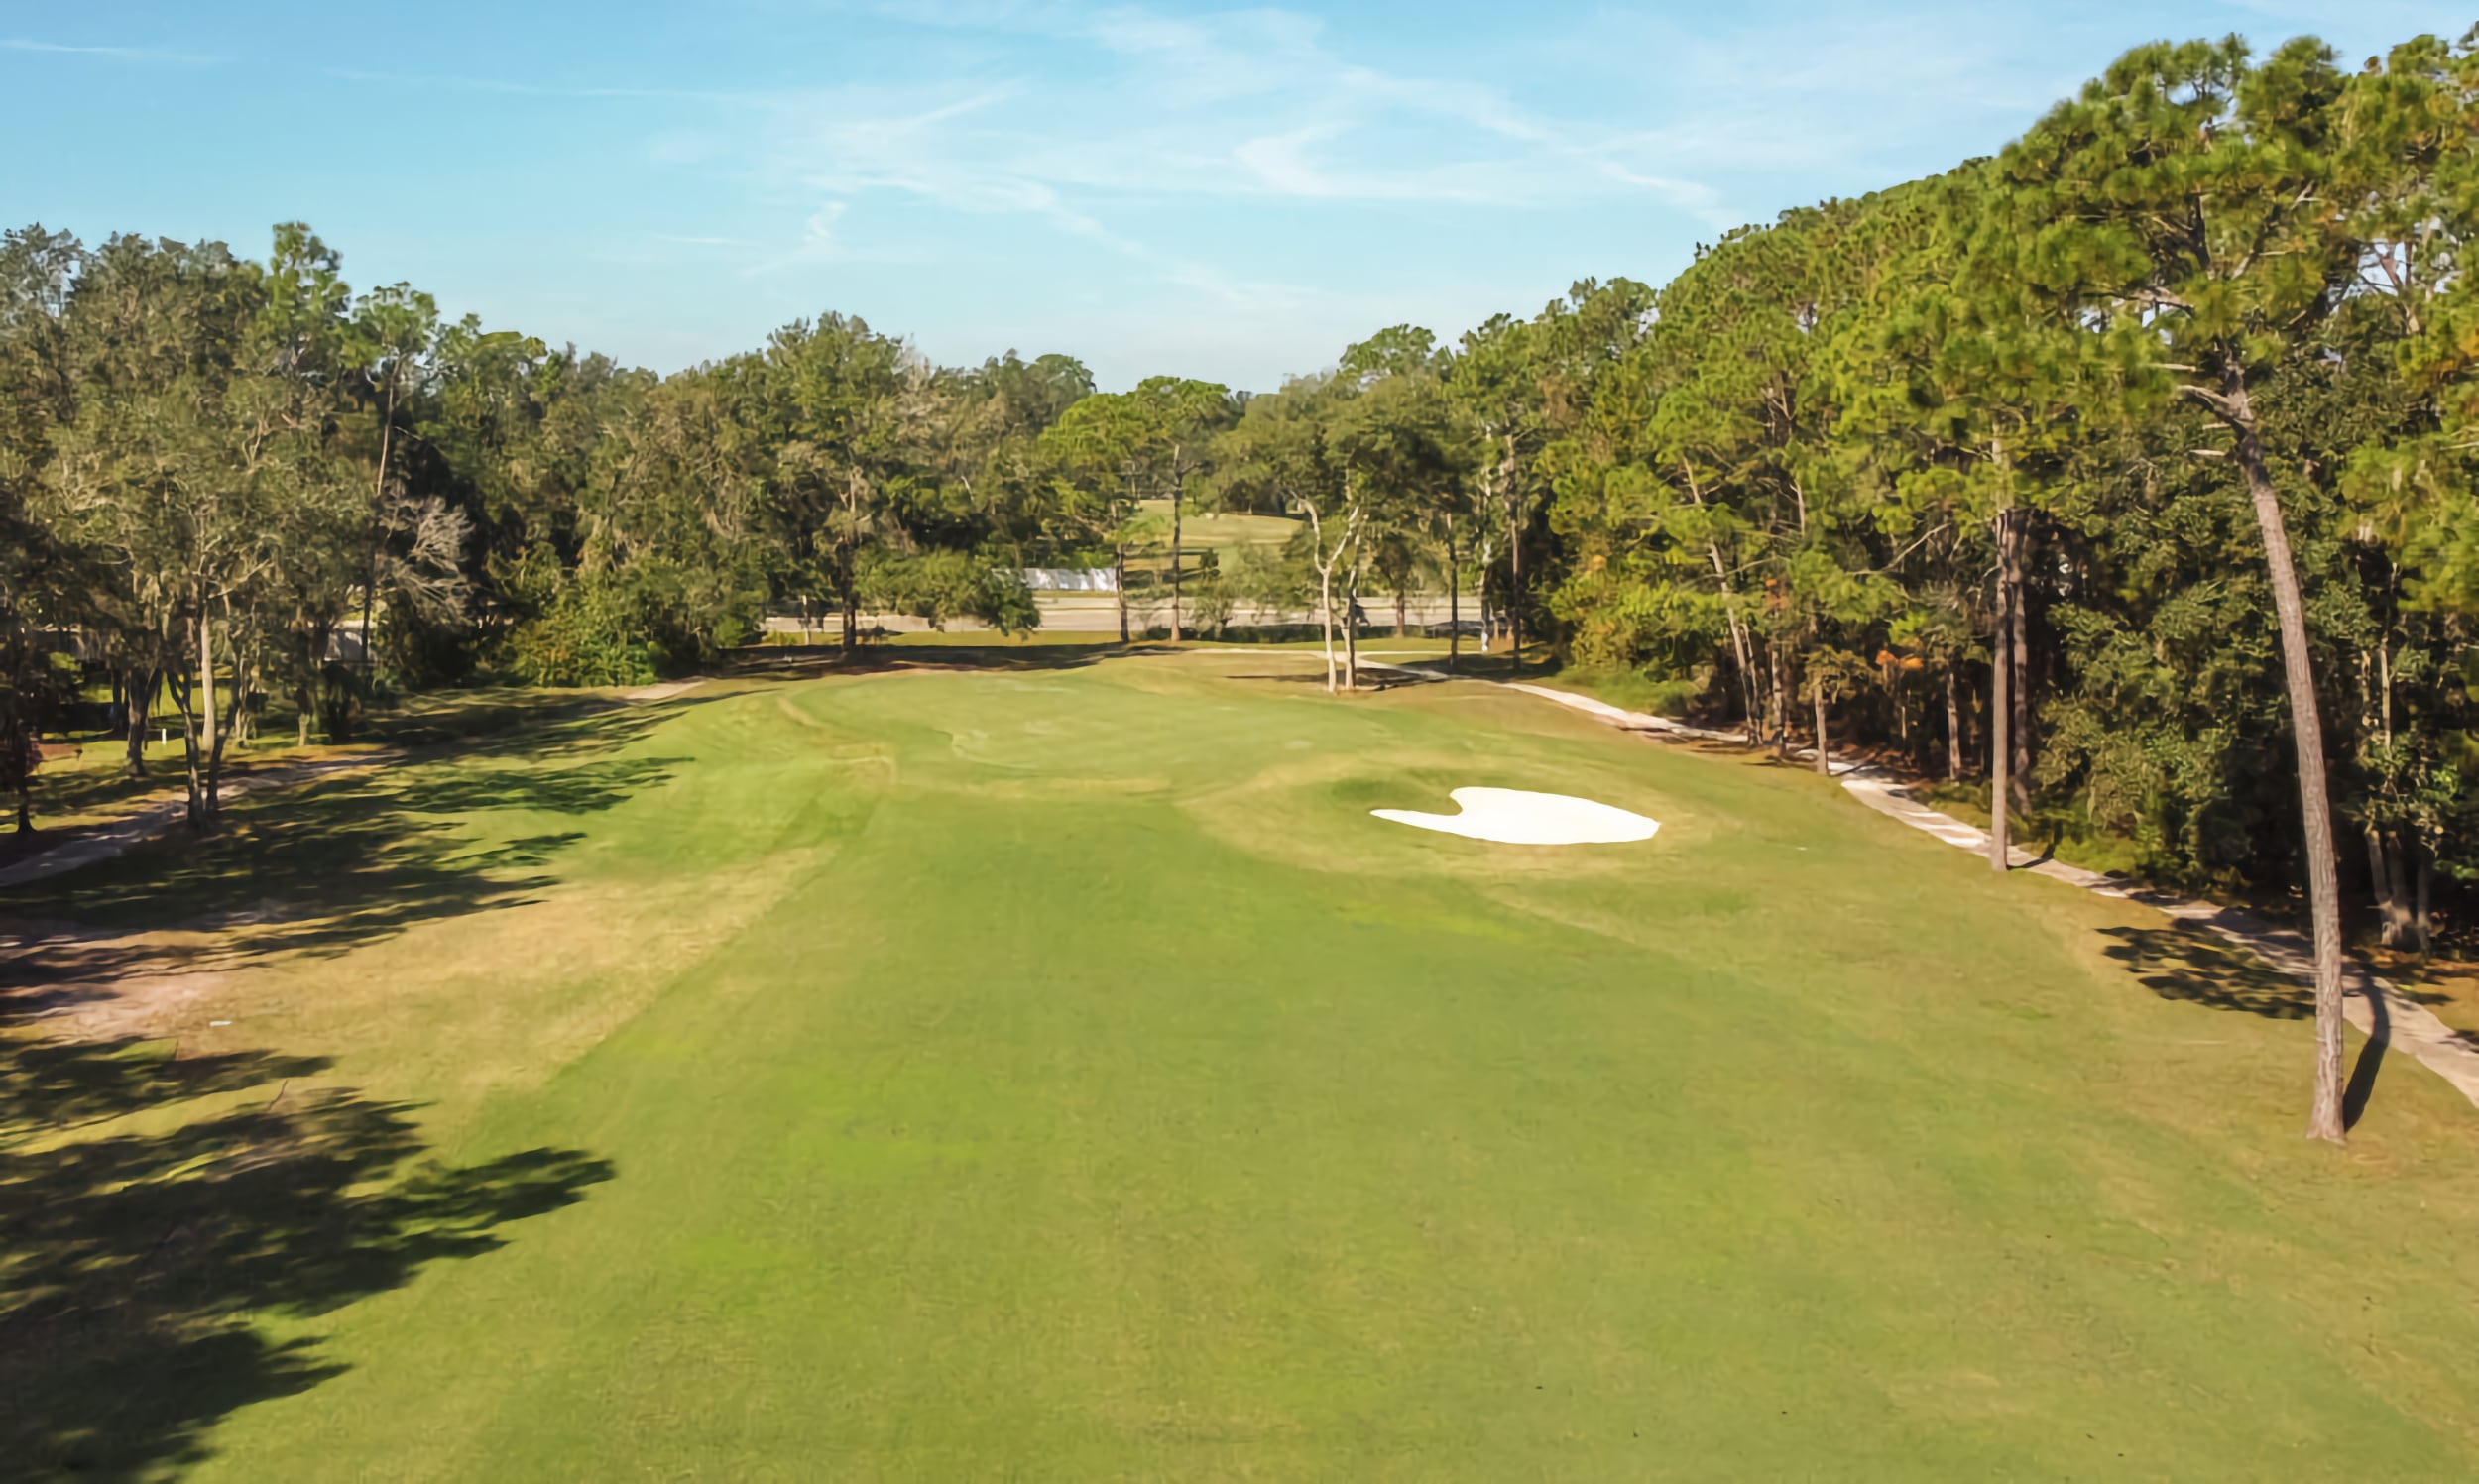 A fairway and solitary sand trap at Julington Creek Country Club, framed by dense tree barriers